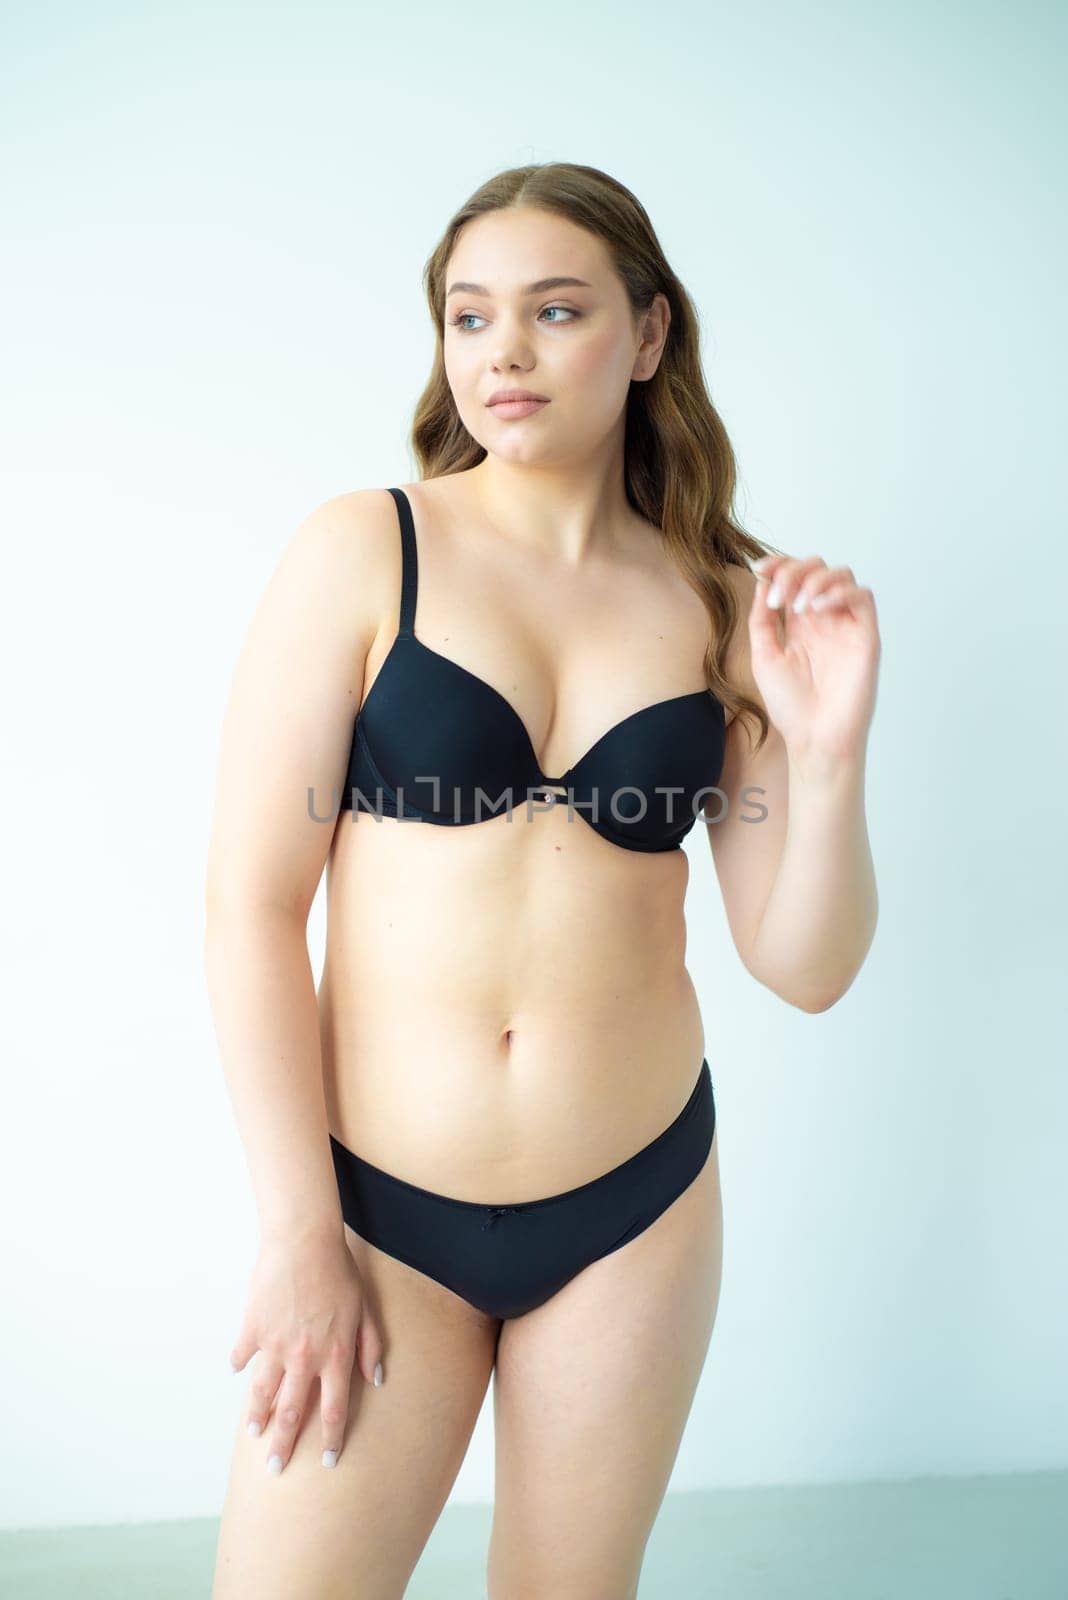 young woman with beautiful hair in black lingerie posing isolated on white background. Model test, snap, polaroid